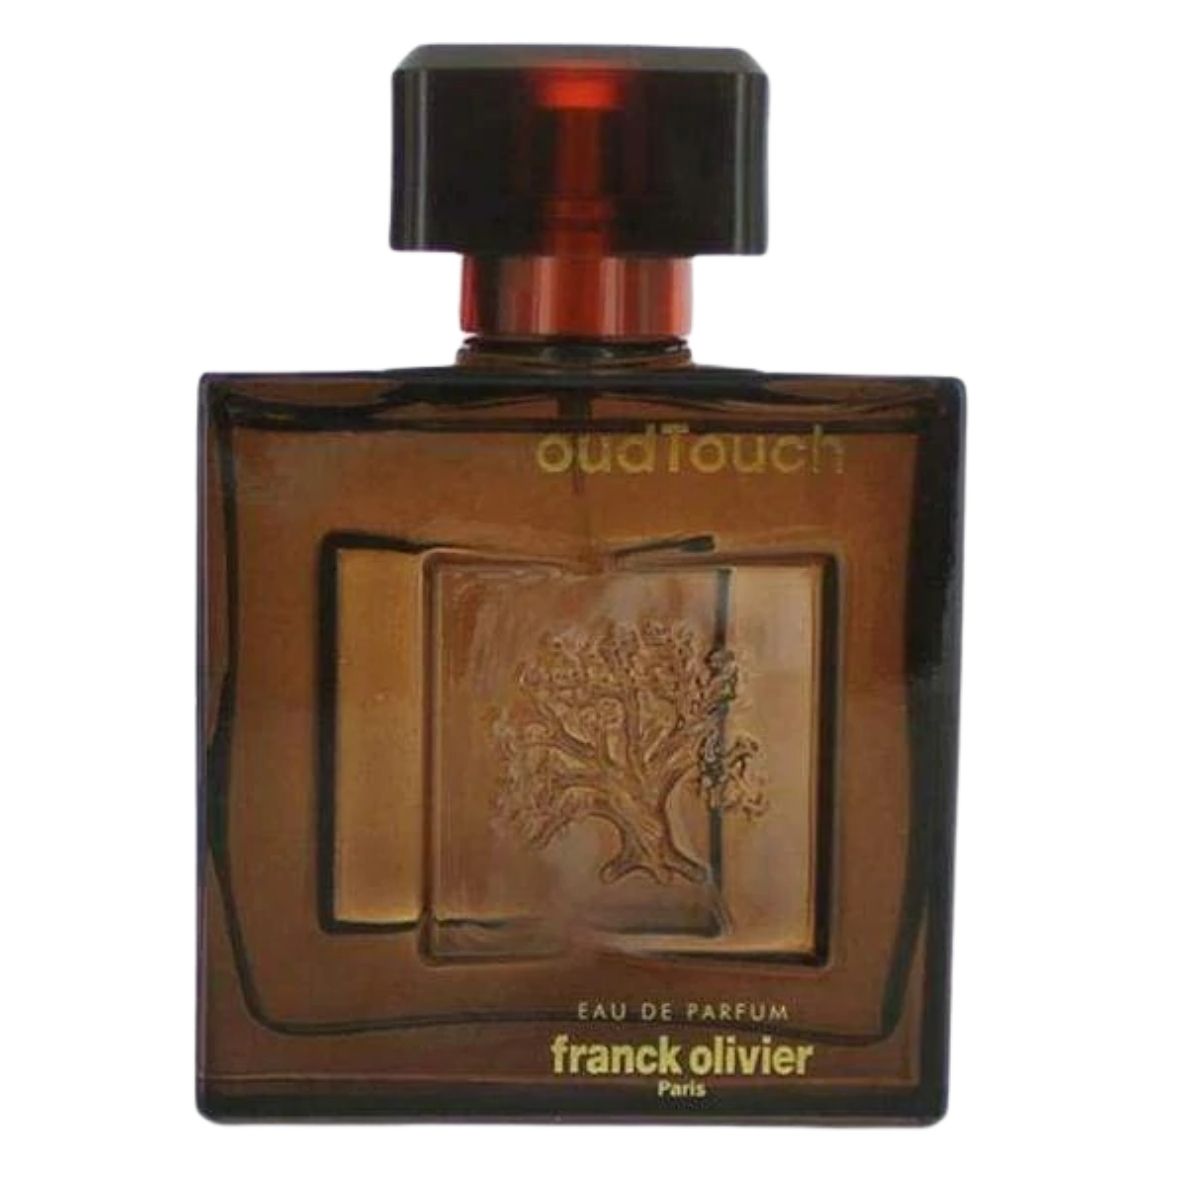 Oud Touch by Franck Olivier for Men EDP 100mL - Perfumes